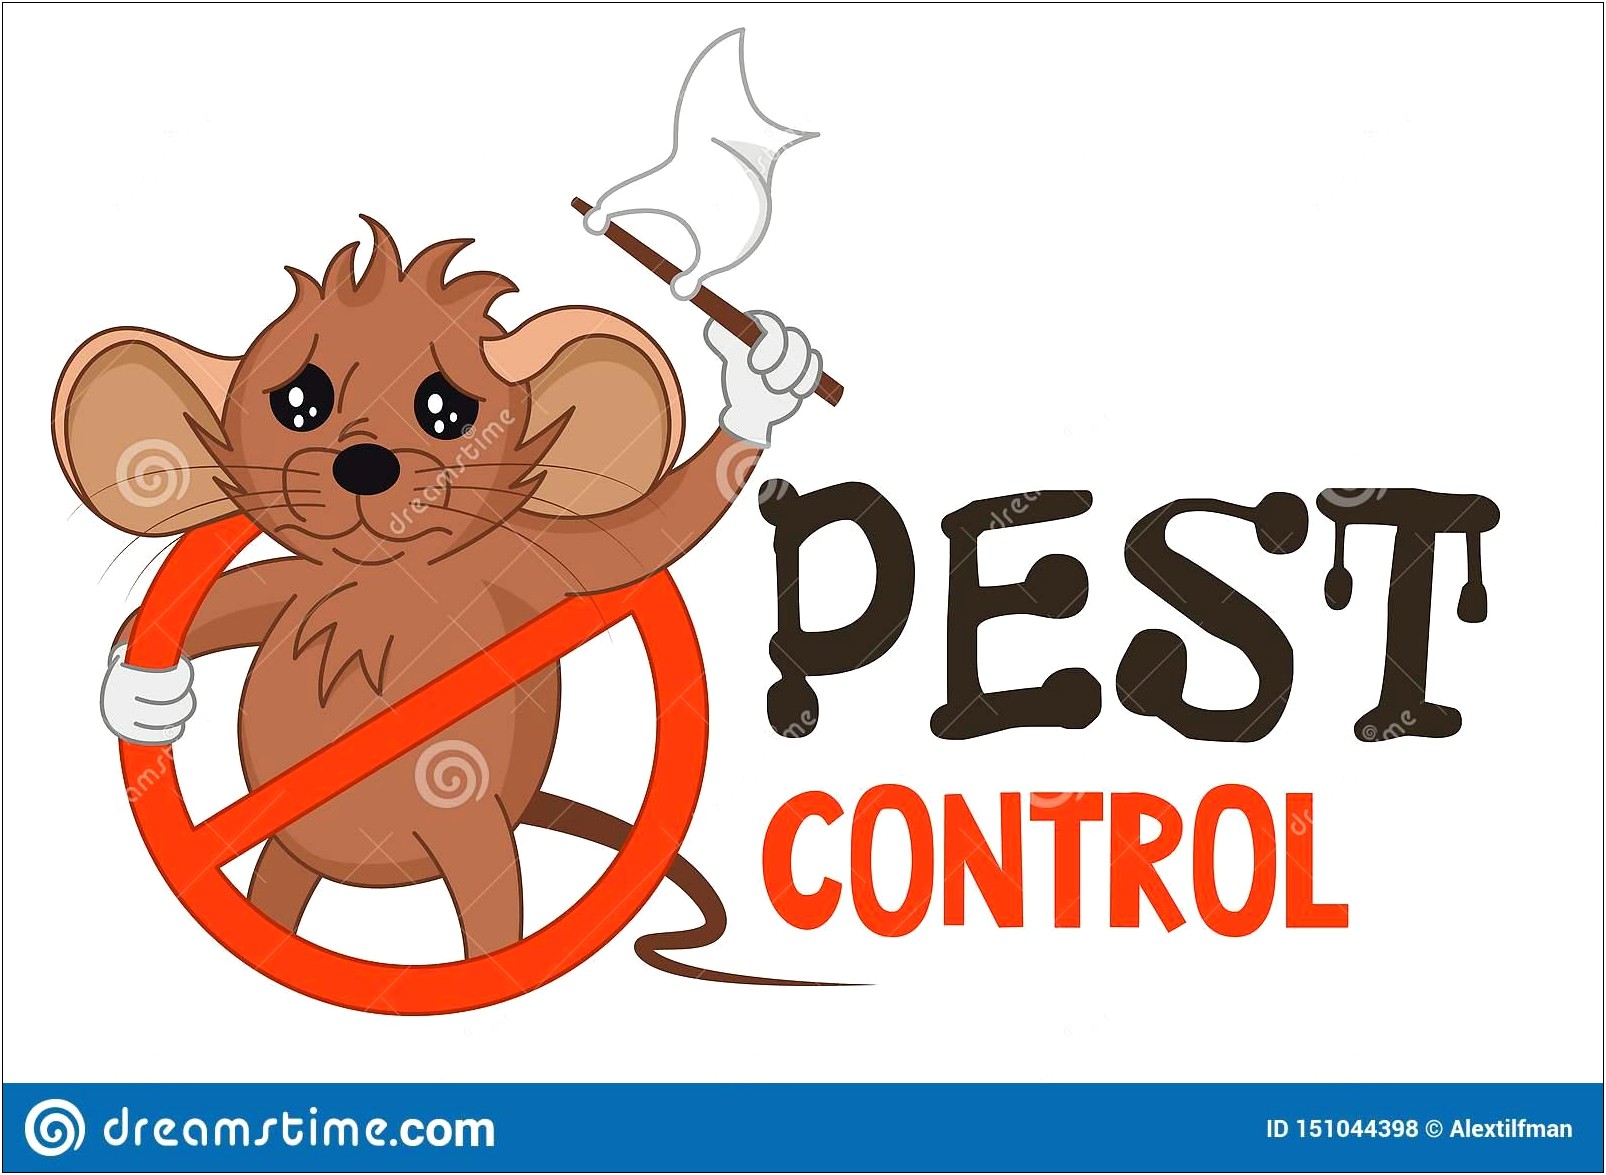 Free Business Card Templates For Pest Control